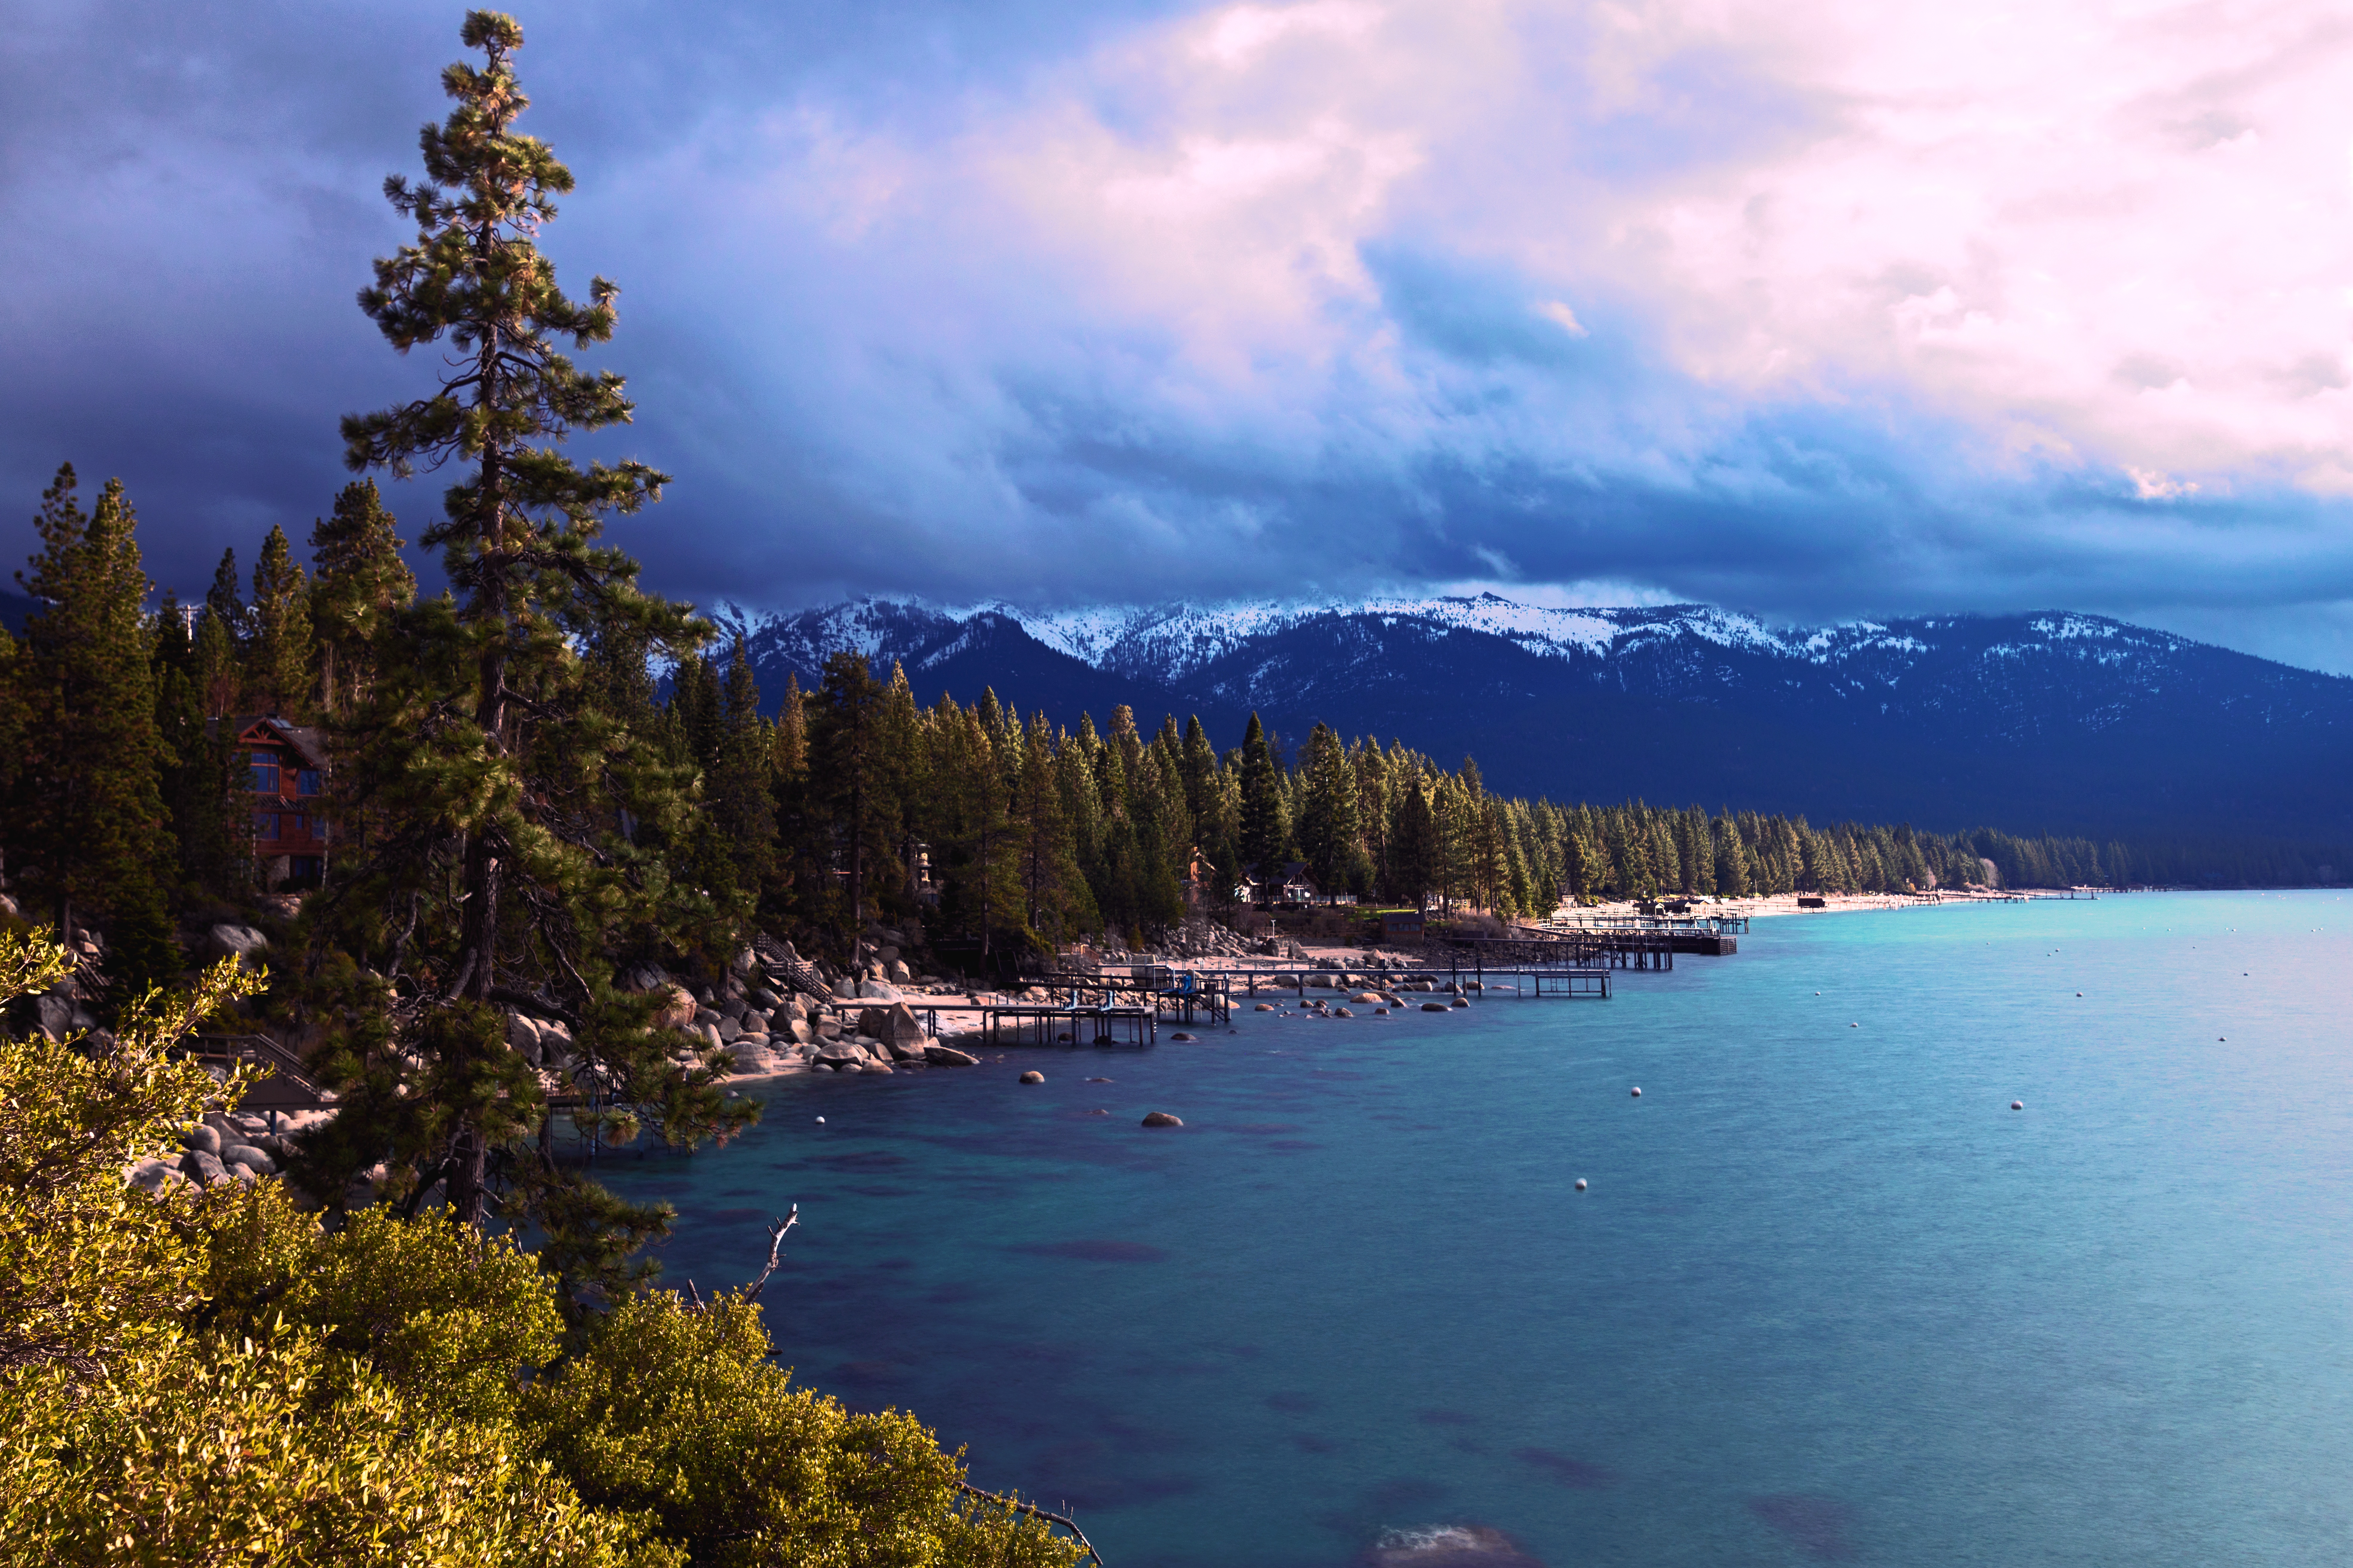 Turquoise lake Tahoe shoreline with piers reaching into the water and a dramatic cloudy backdrop.